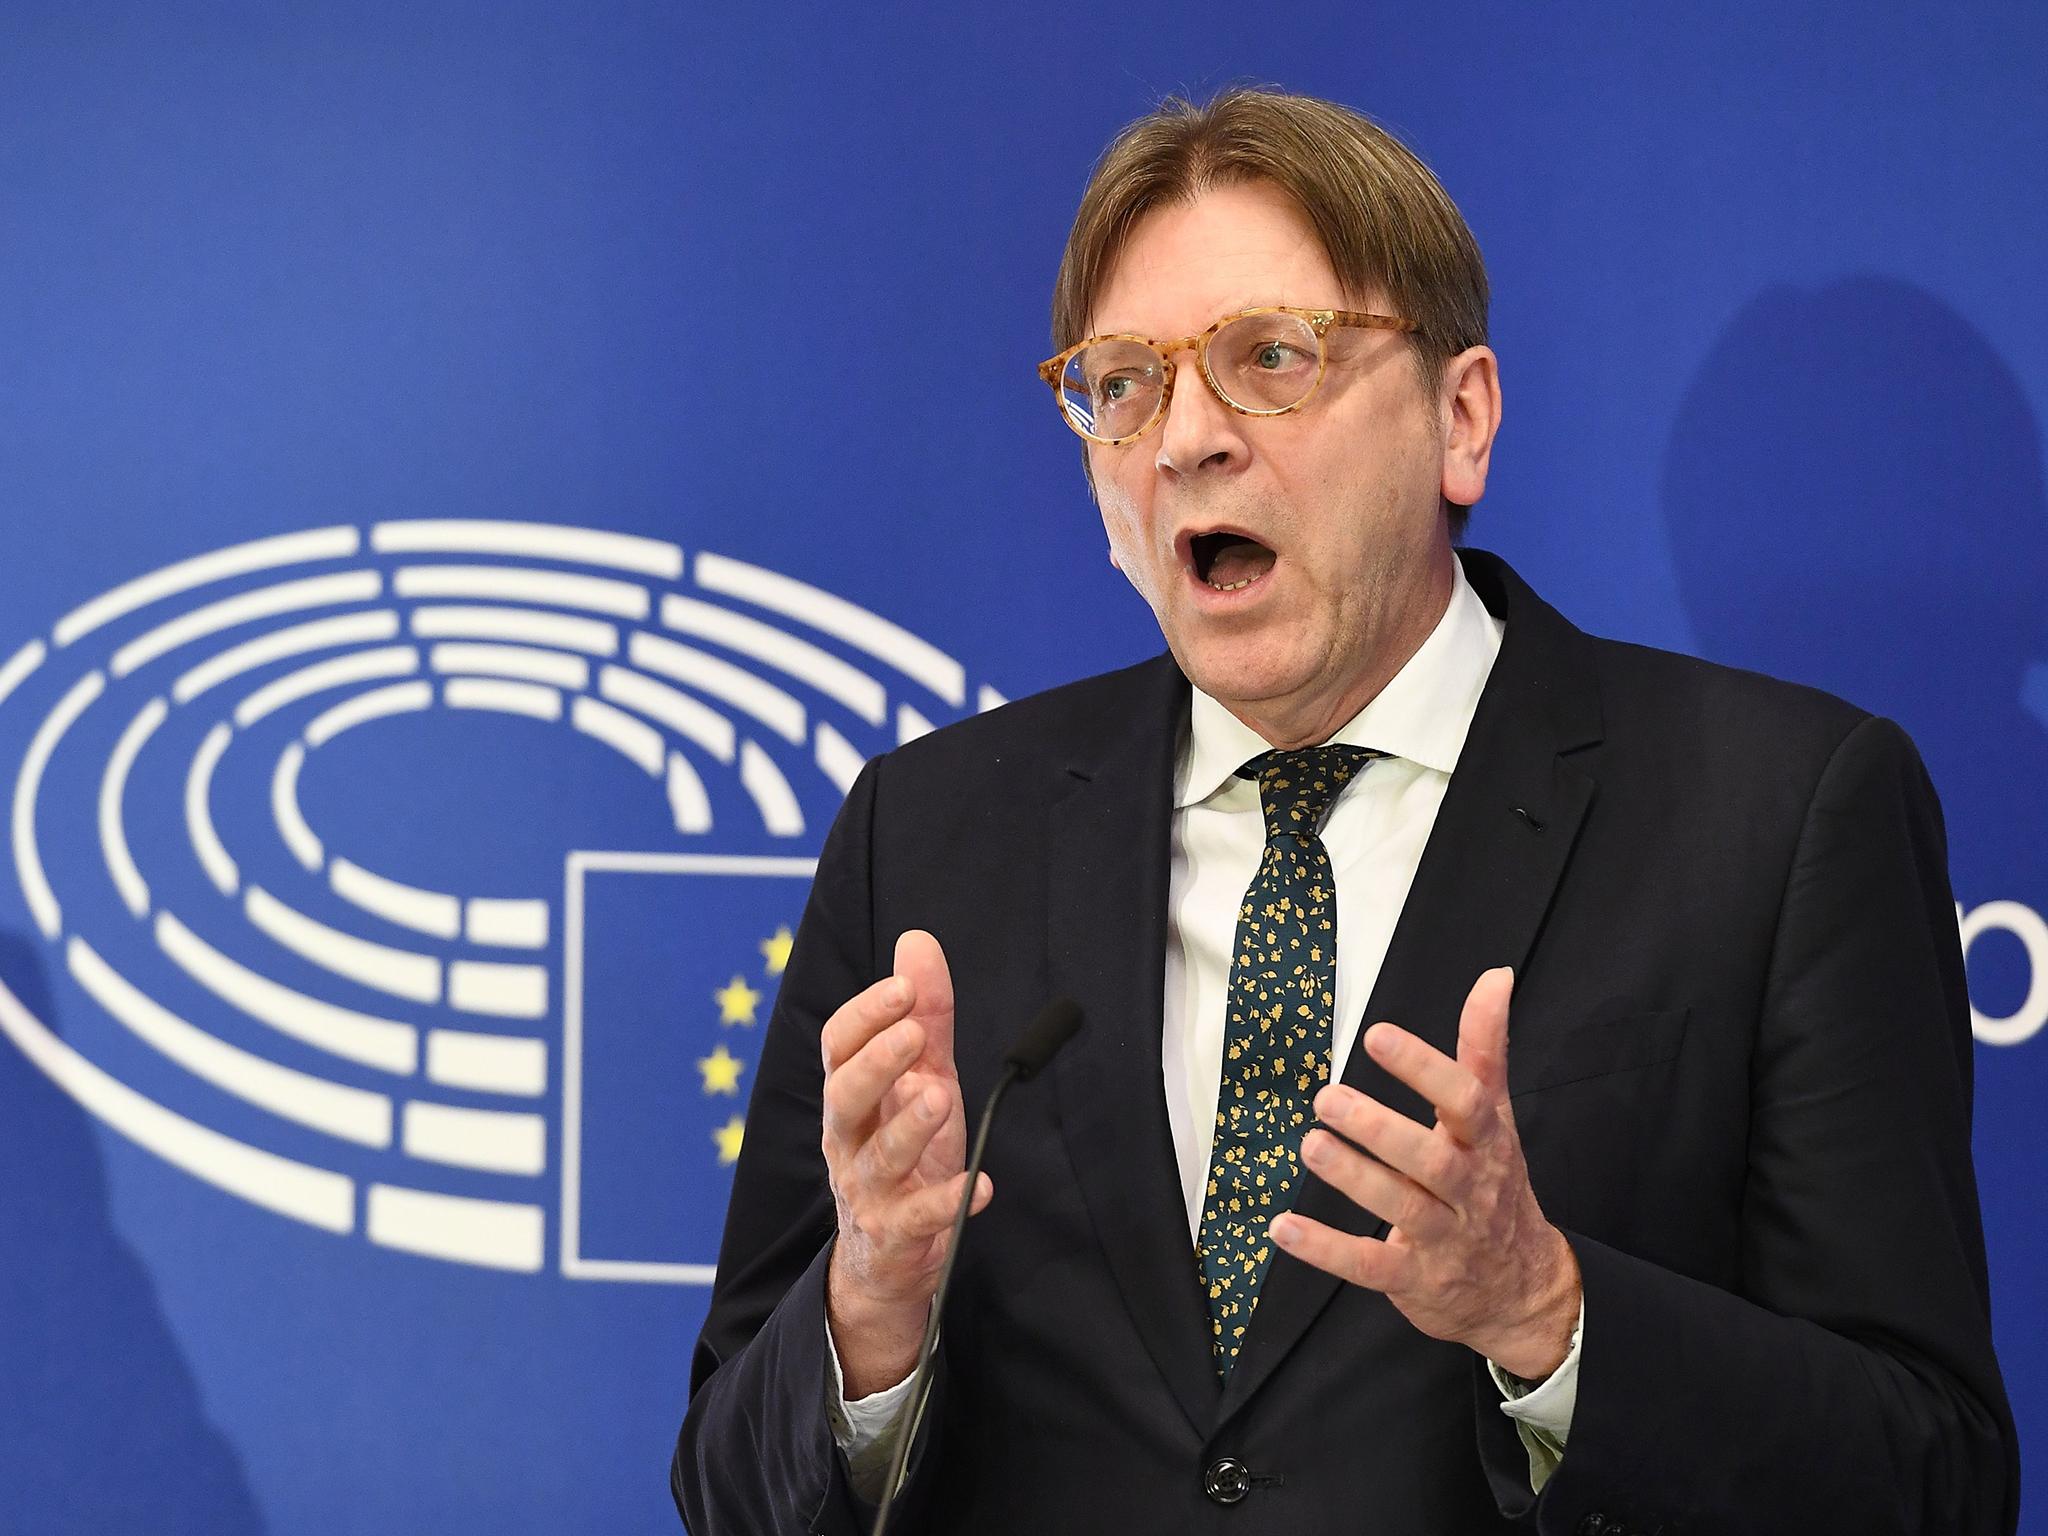 Verhofstadt said that the next round of talks could be pushed back to the final week of September